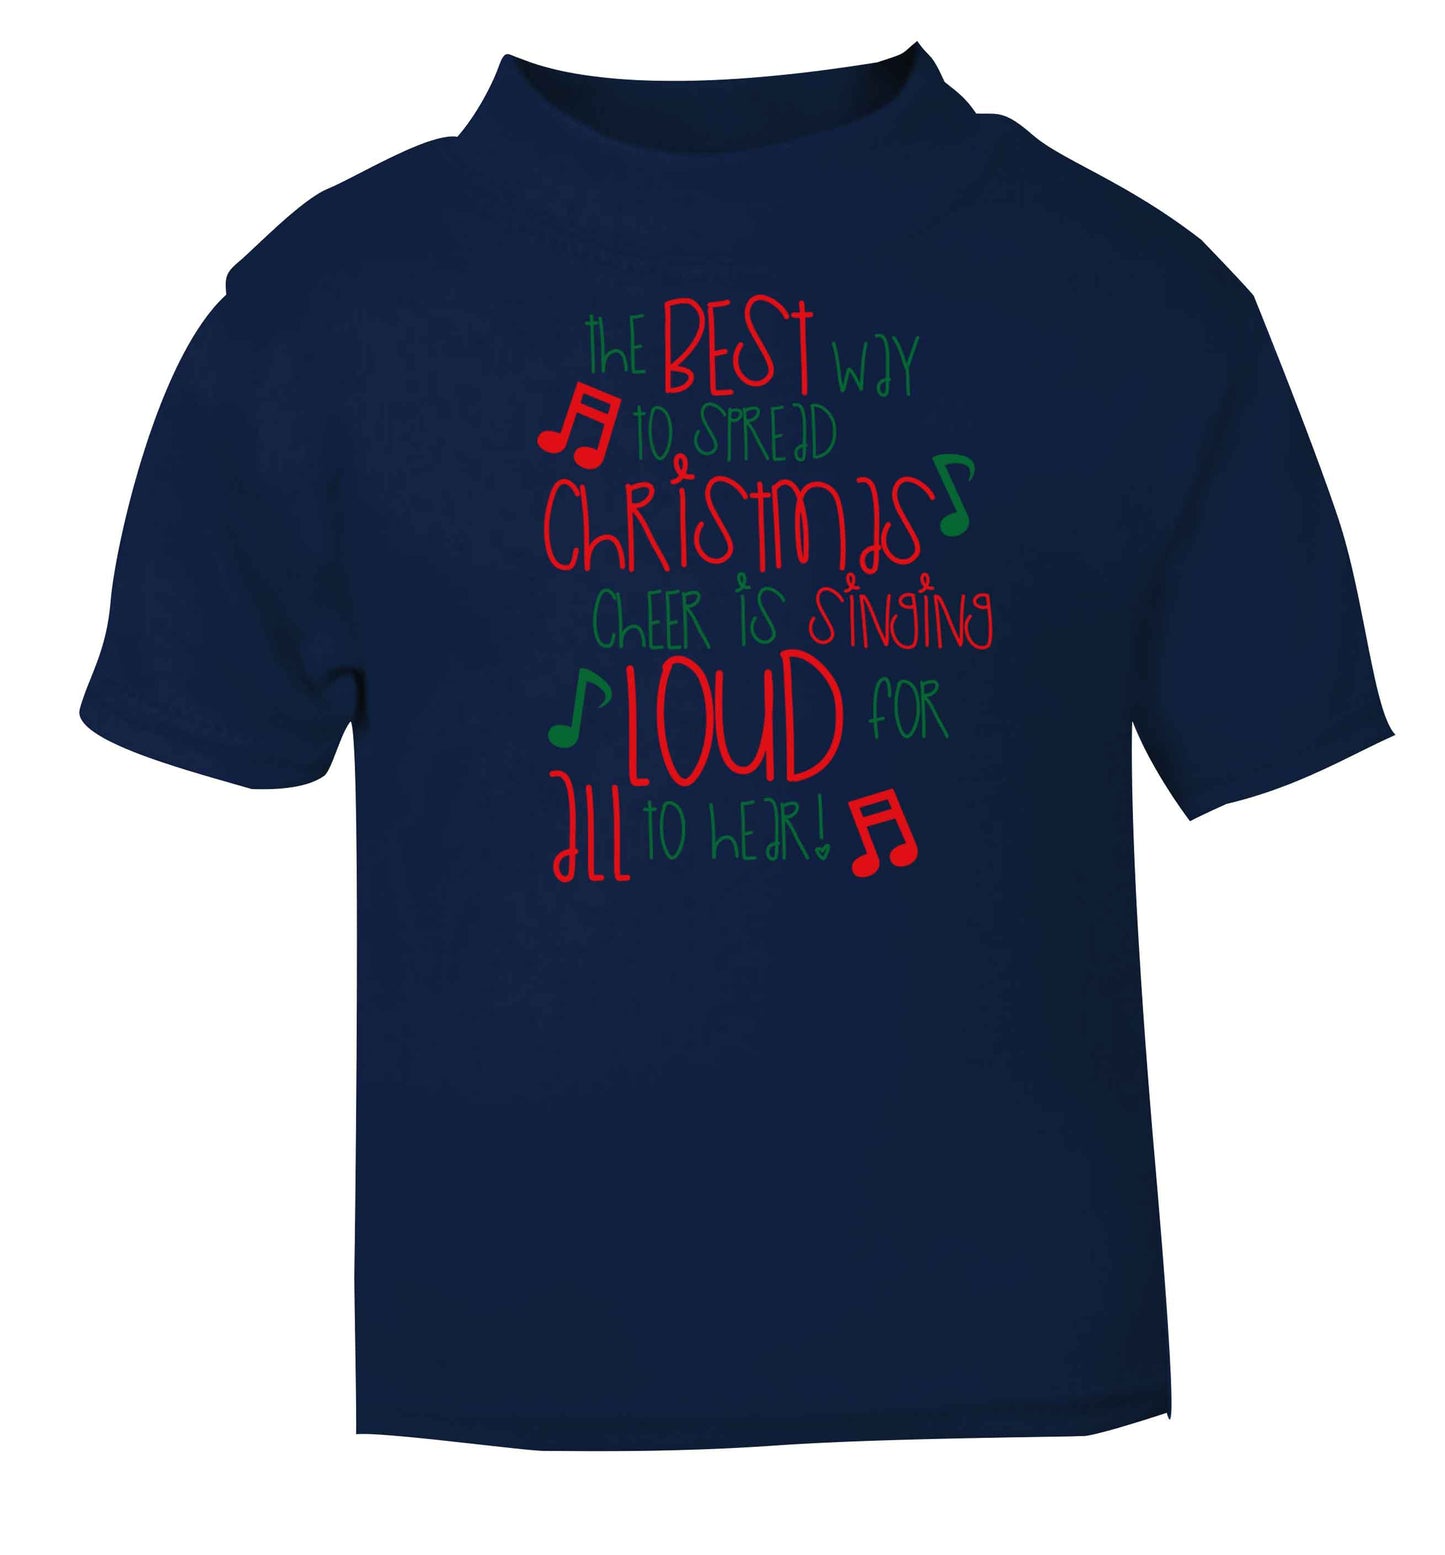 The best way to spread Christmas cheer is singing loud for all to hear navy baby toddler Tshirt 2 Years